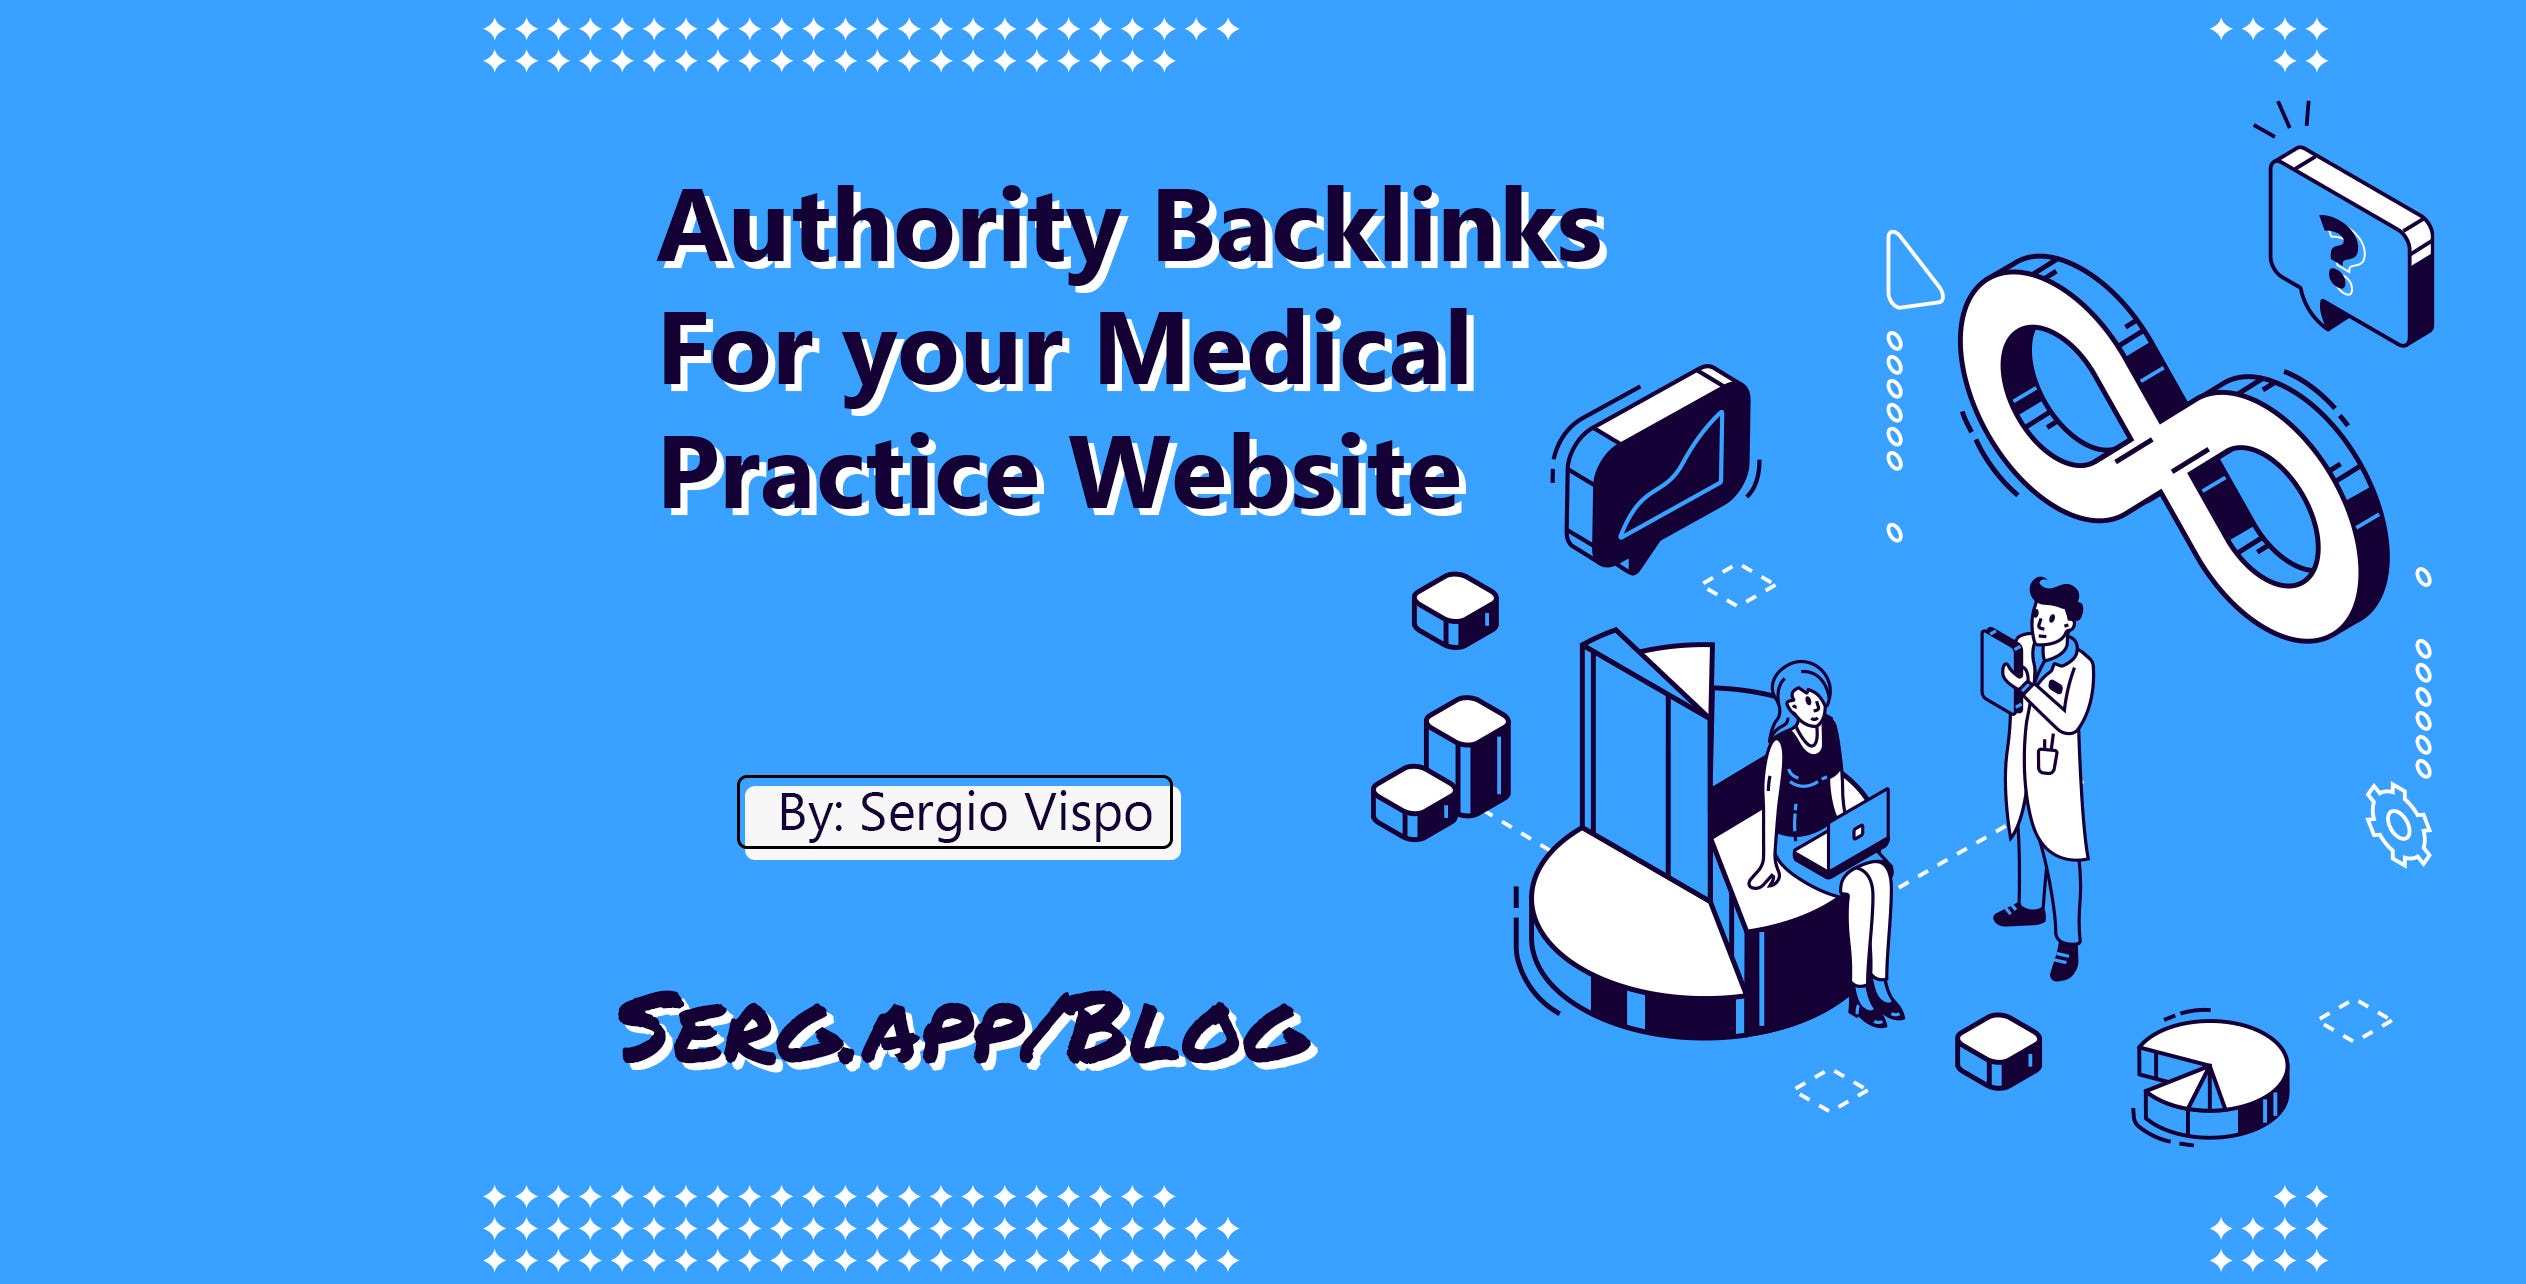 How to get Authority Backlinks for your Medical Website, by Sergio Vispo